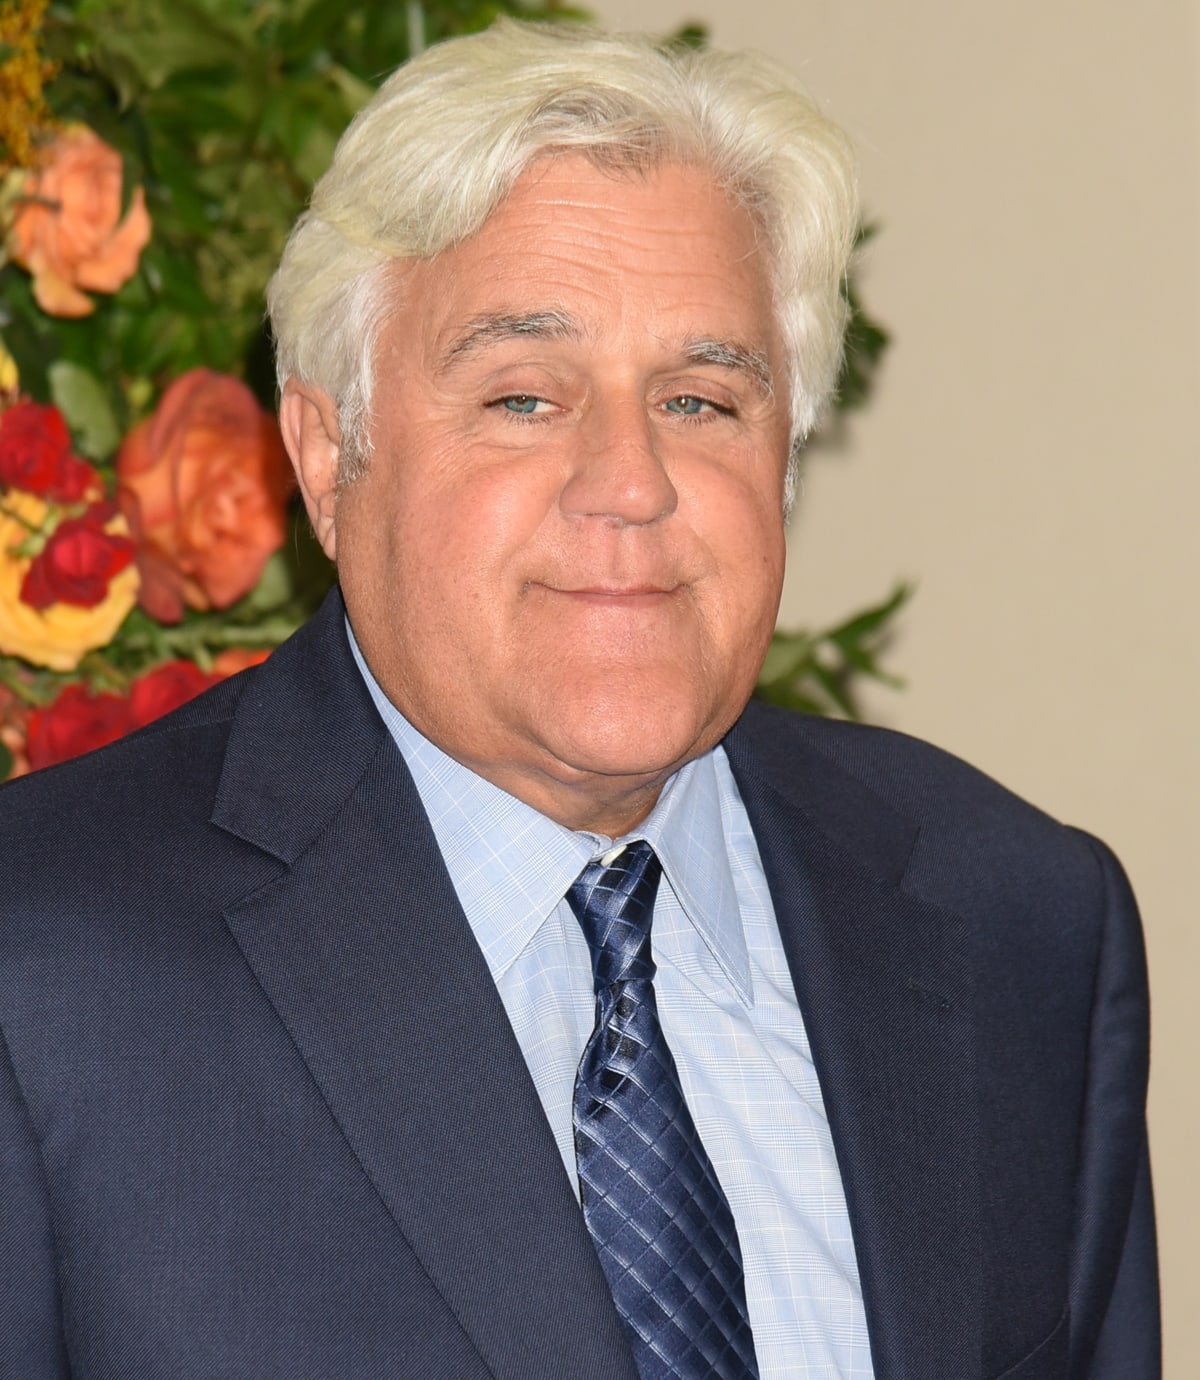 Falsely claimed to be gay, Jay Leno decided not to have children with his wife